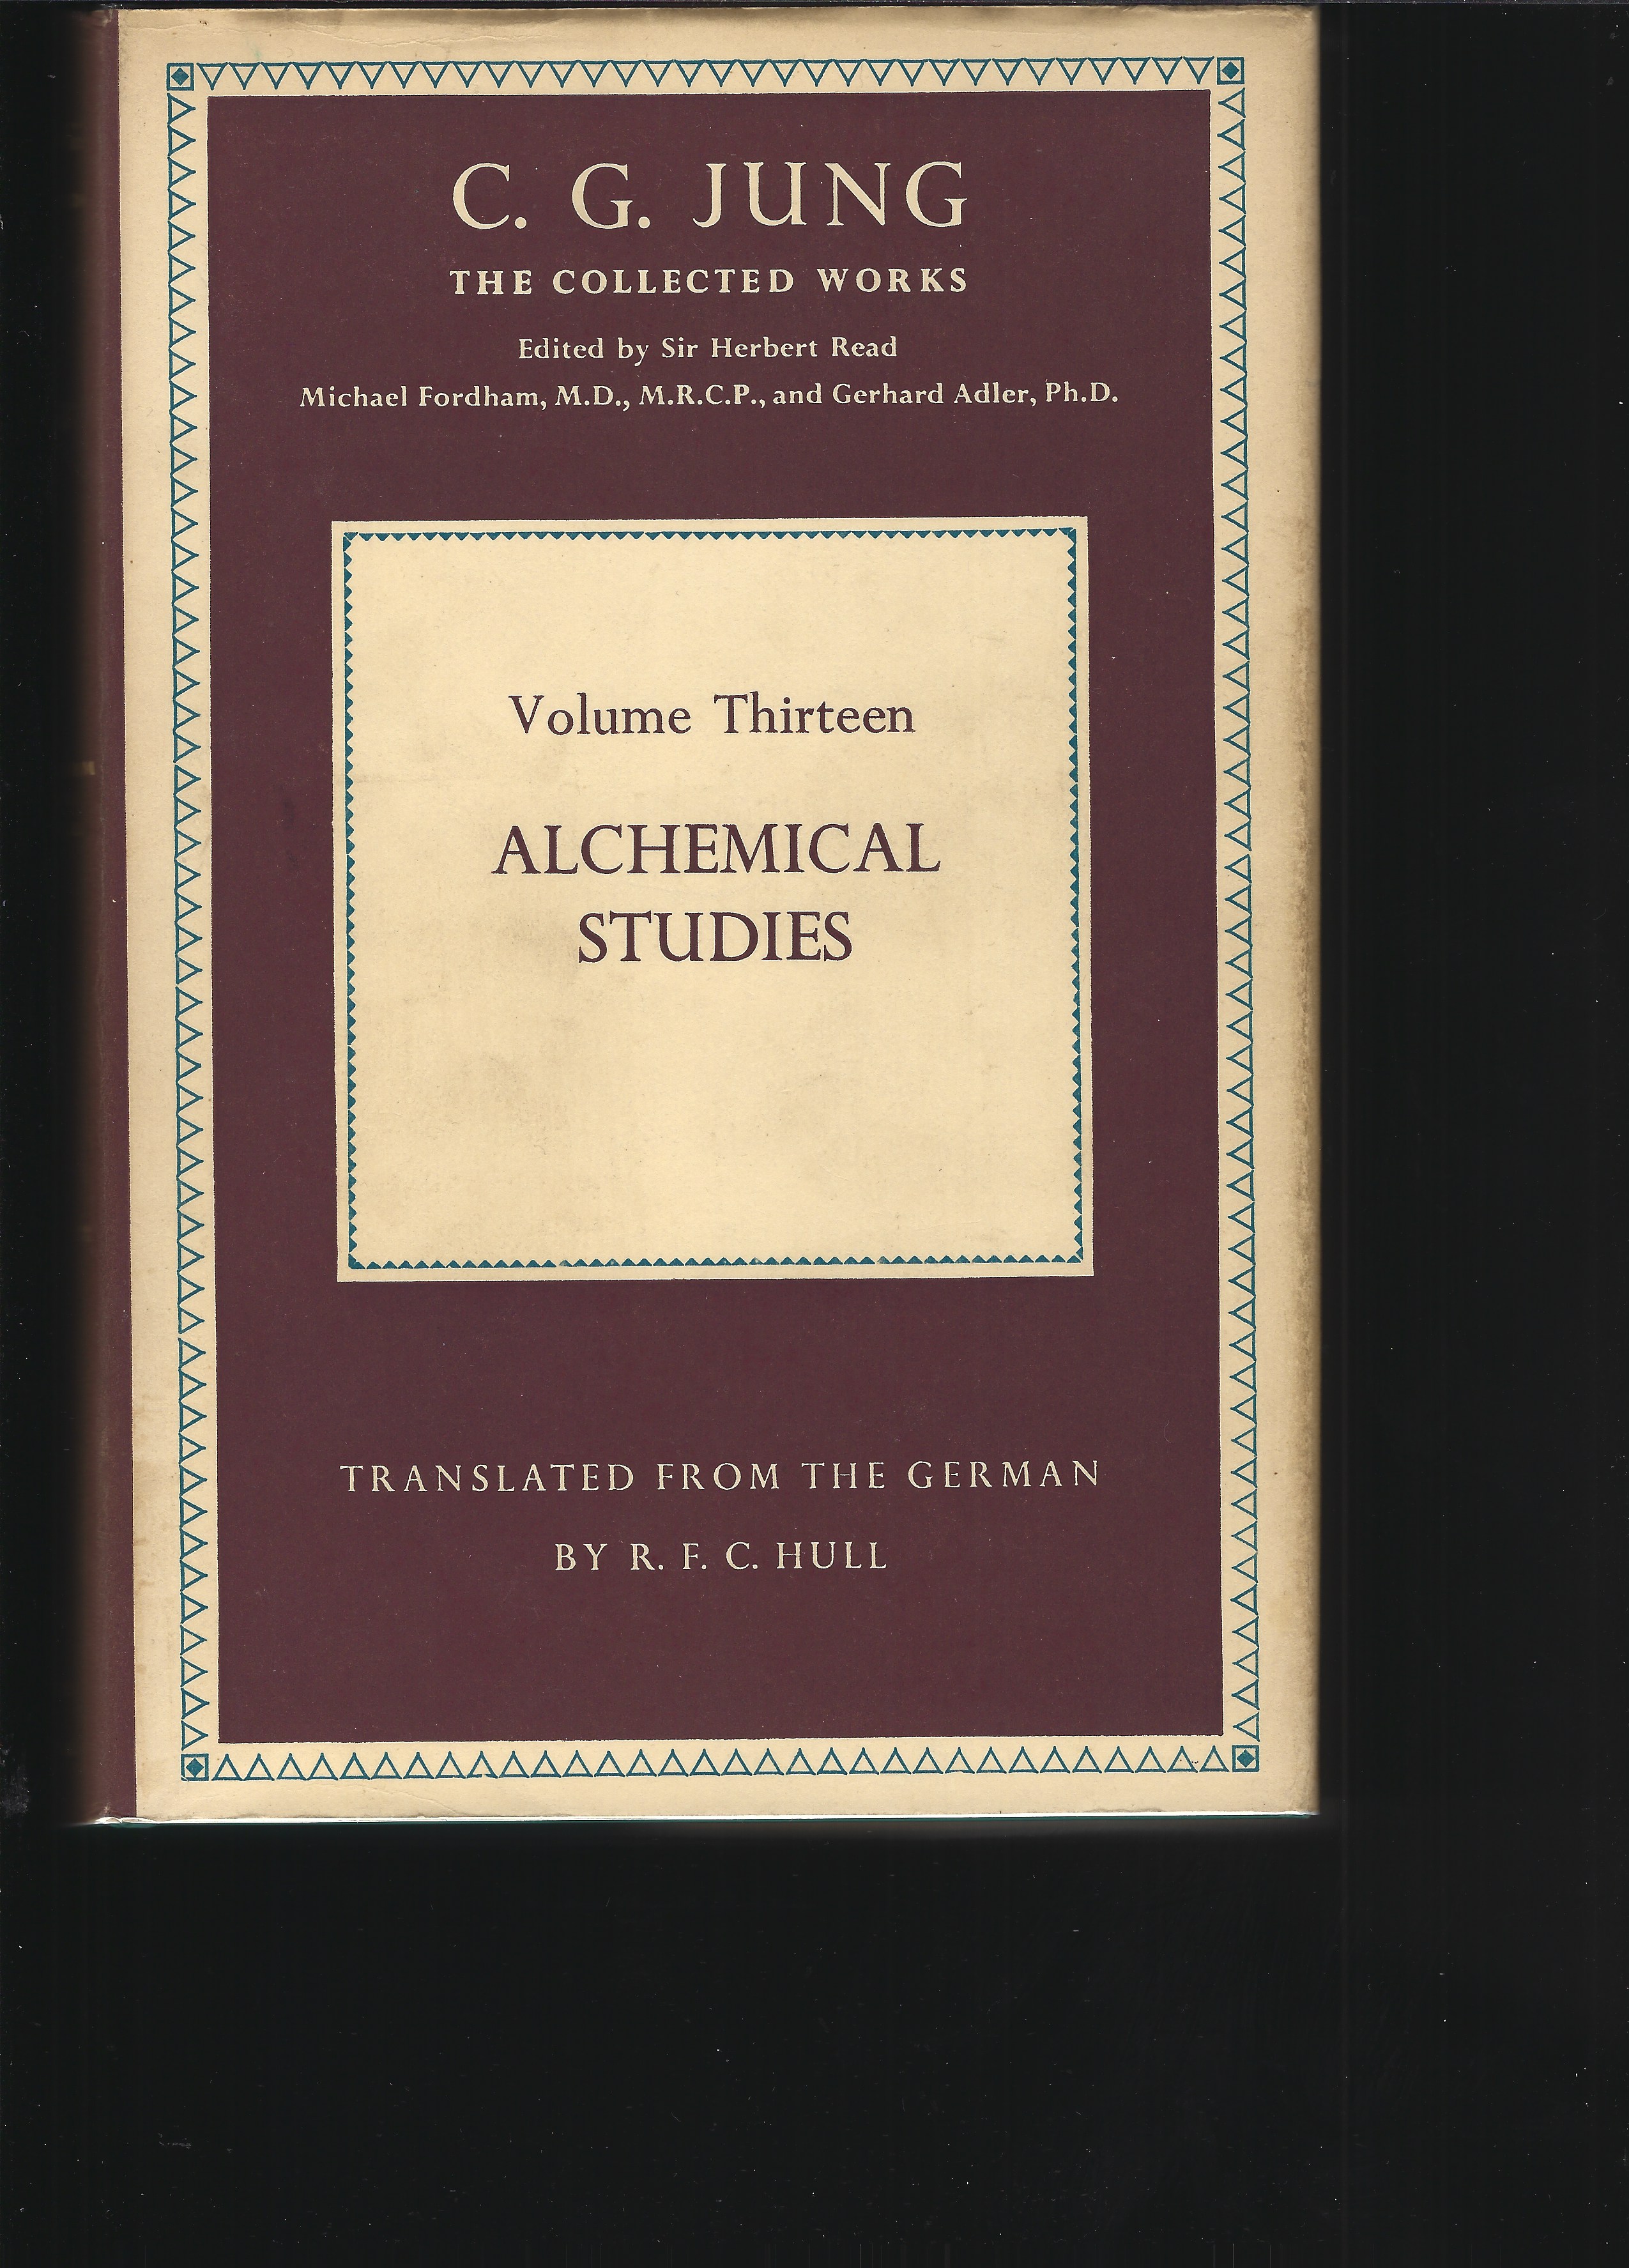 ALCHEMICAL STUDIES: Volume 13 of The Collected Works - JUNG, C. G. (Translated from the German by R. F. C. Hull)